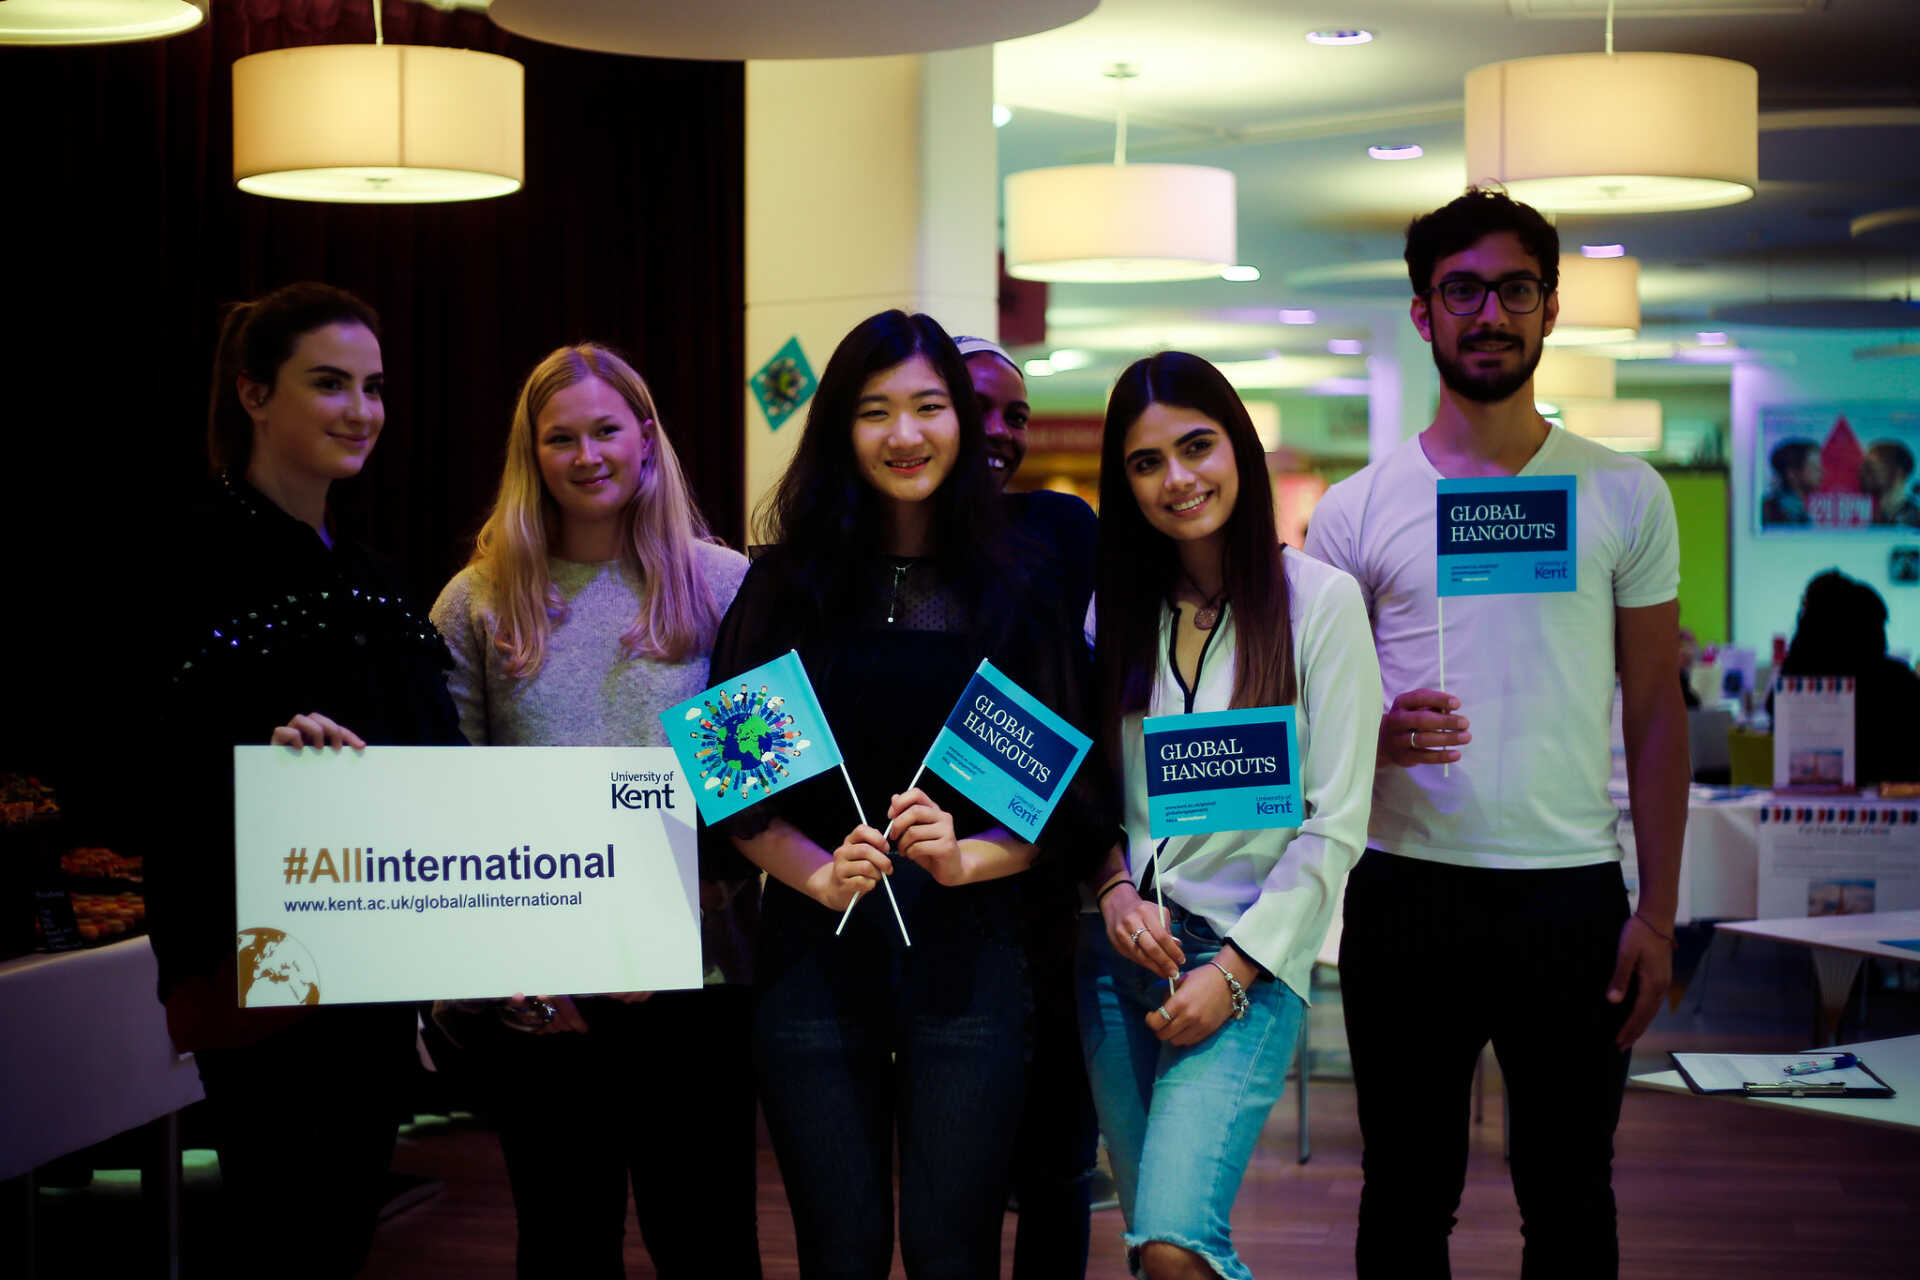 Kent students posing with flags at a Global Hangouts event